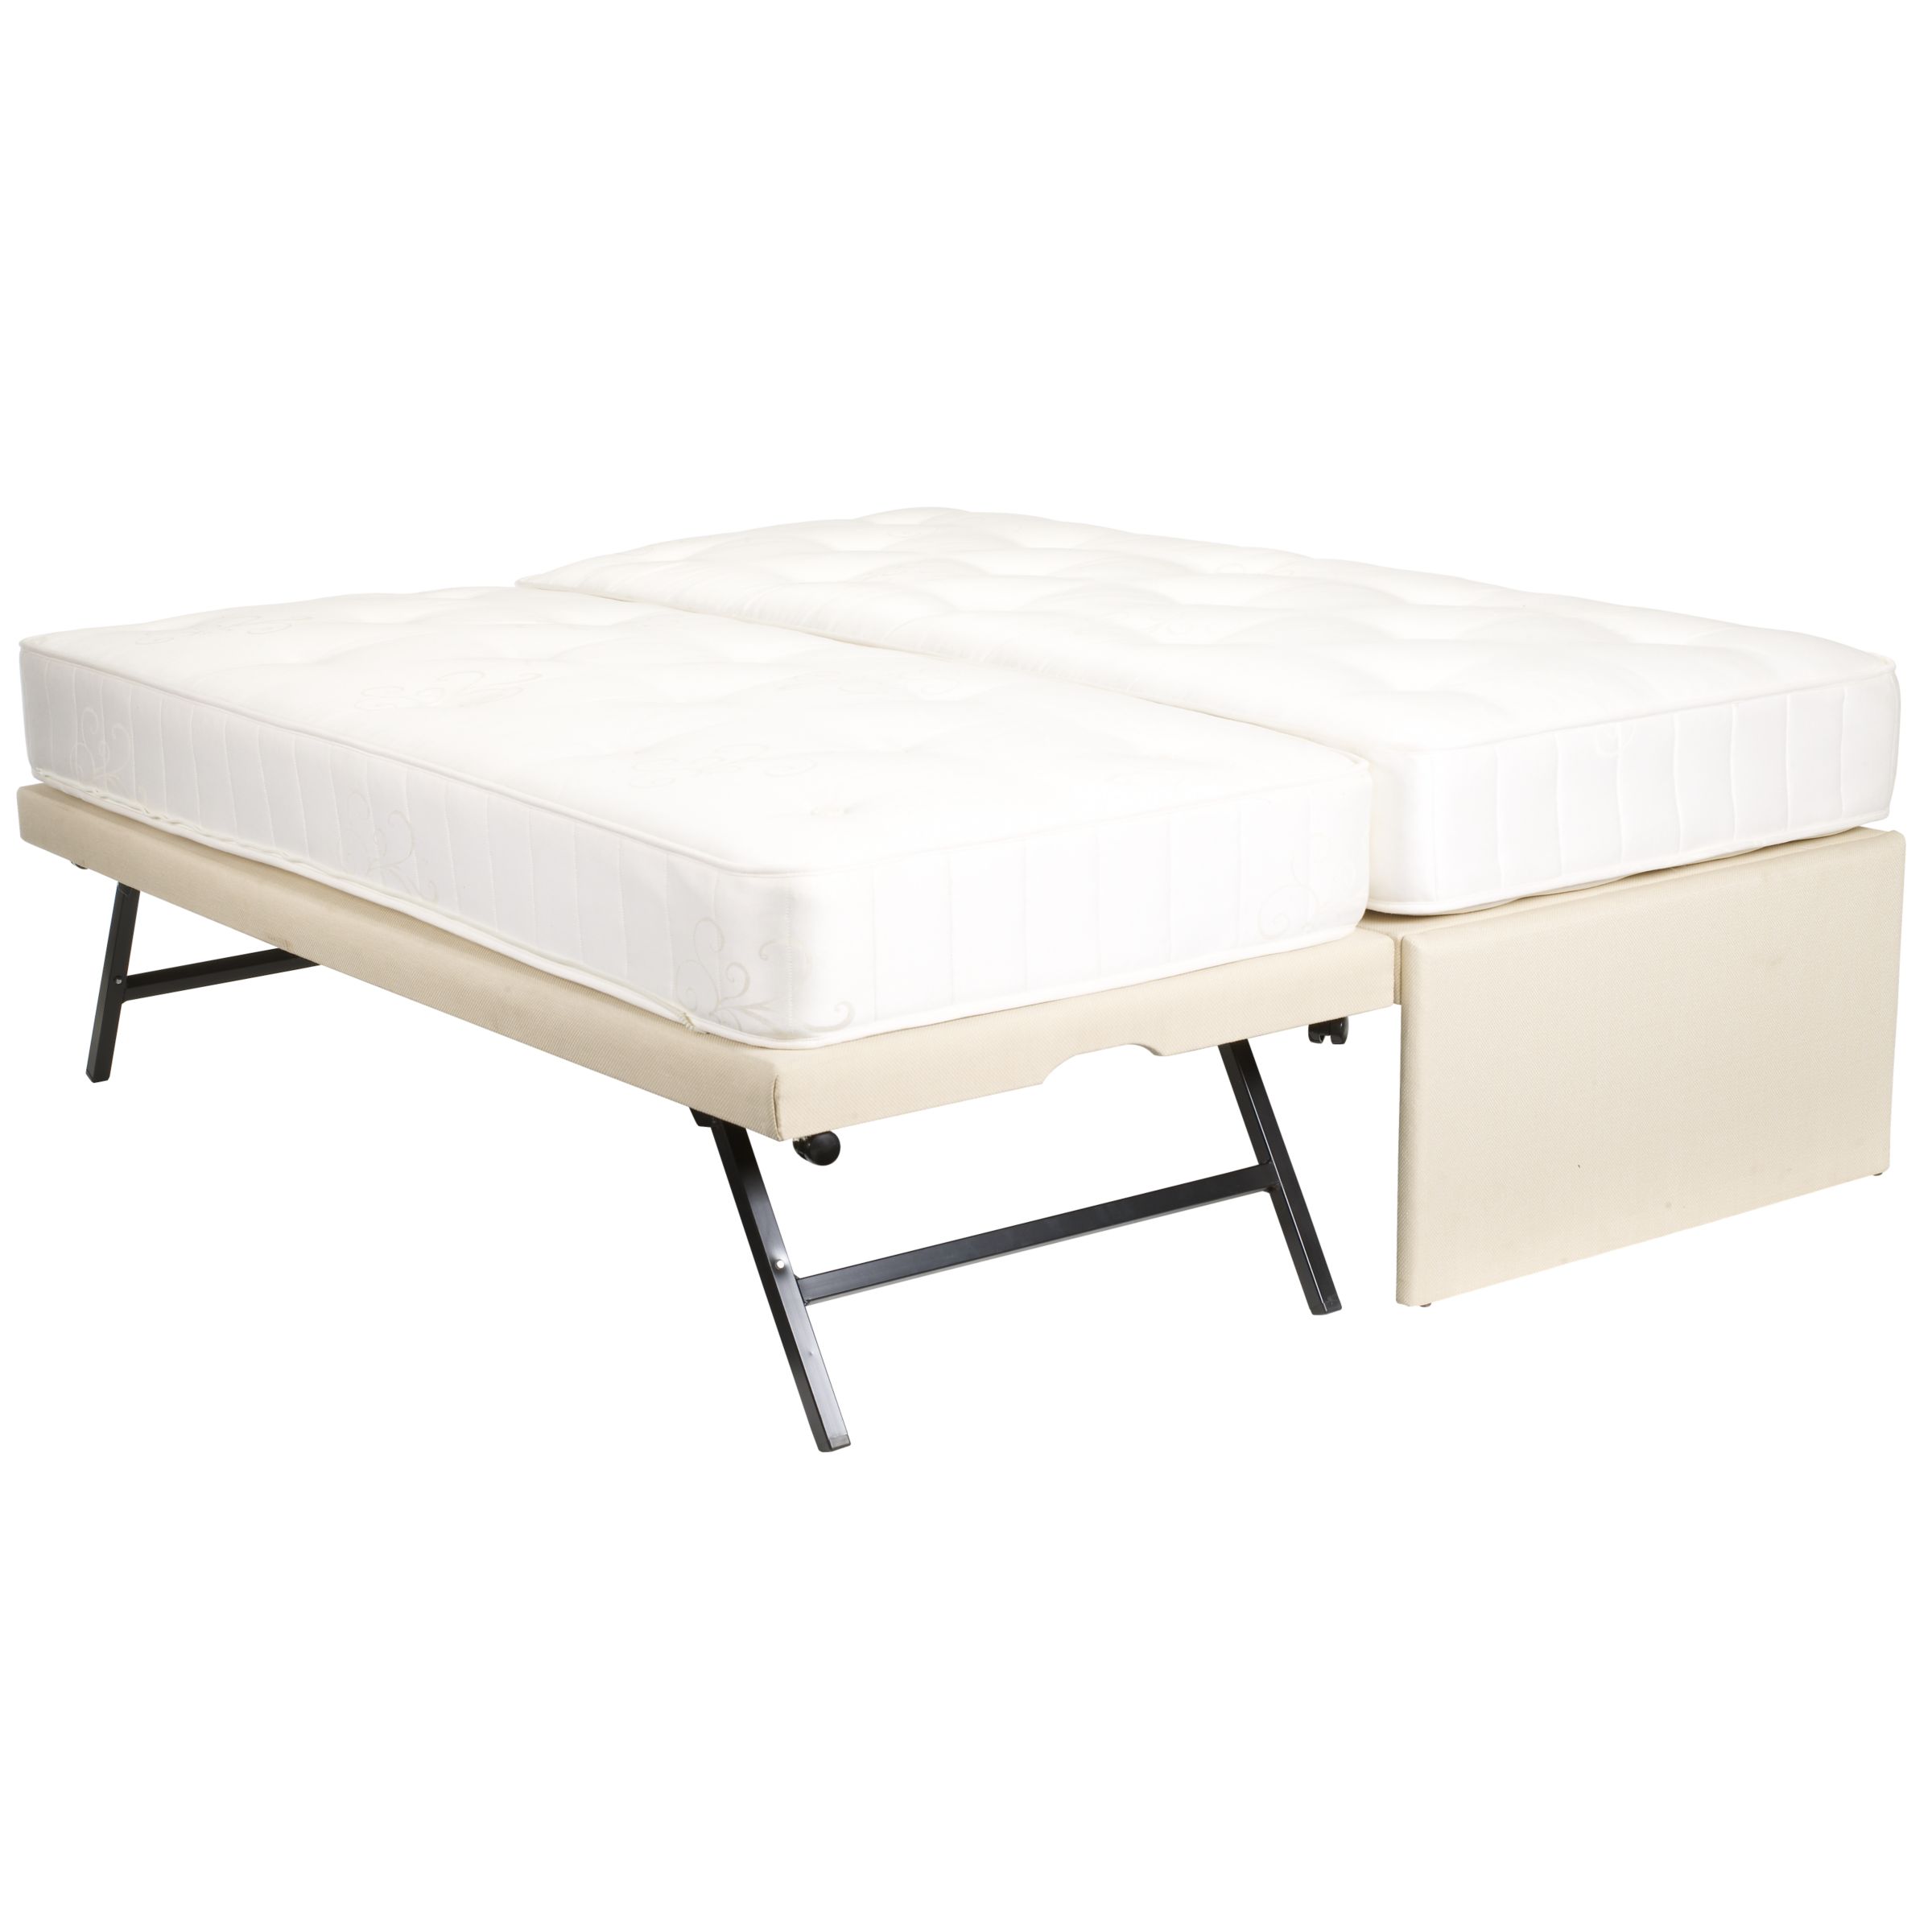 Newton Guest Bed with Mattresses,